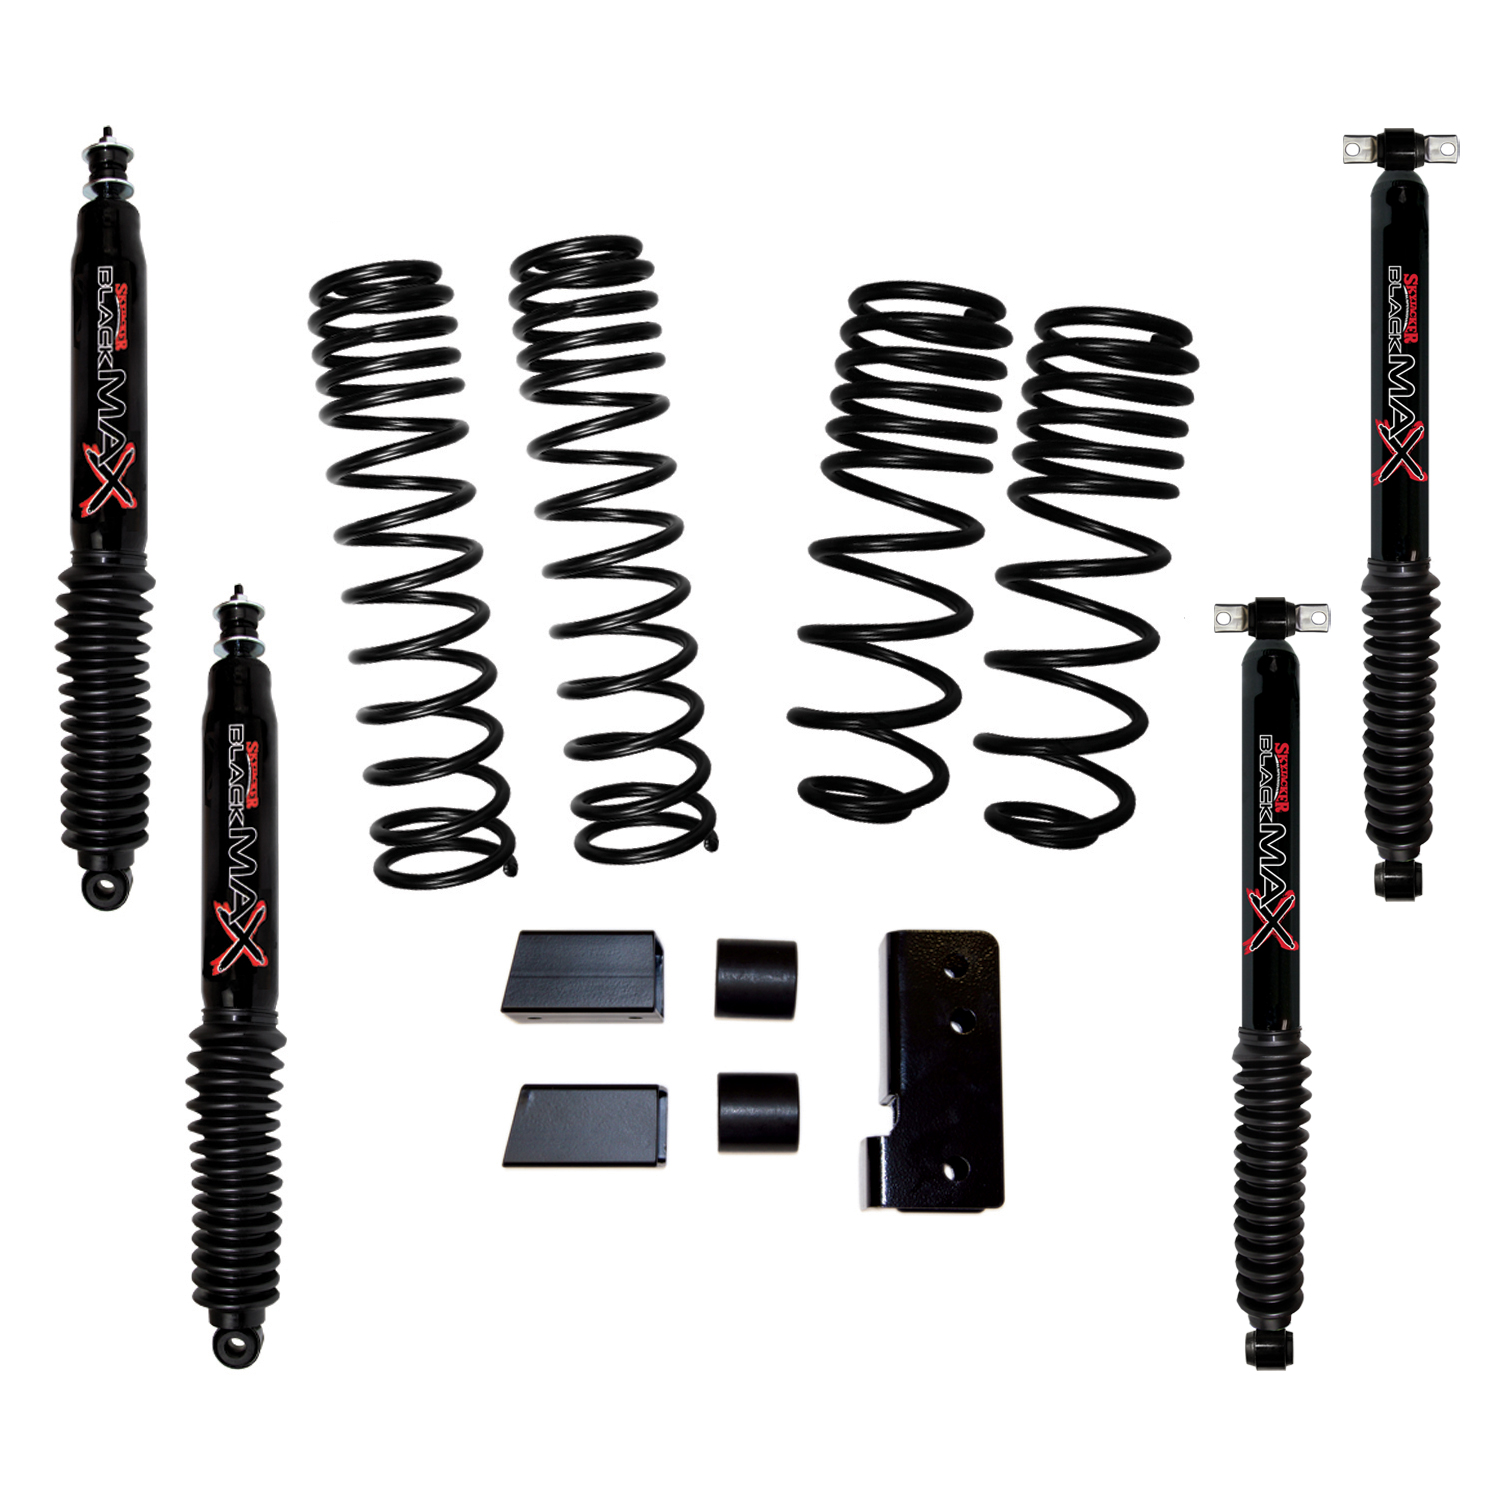 JK20BPBLT Front and Rear Suspension Lift Kit, Lift Amount: 2.5 in. Front/2.5 in. Rear